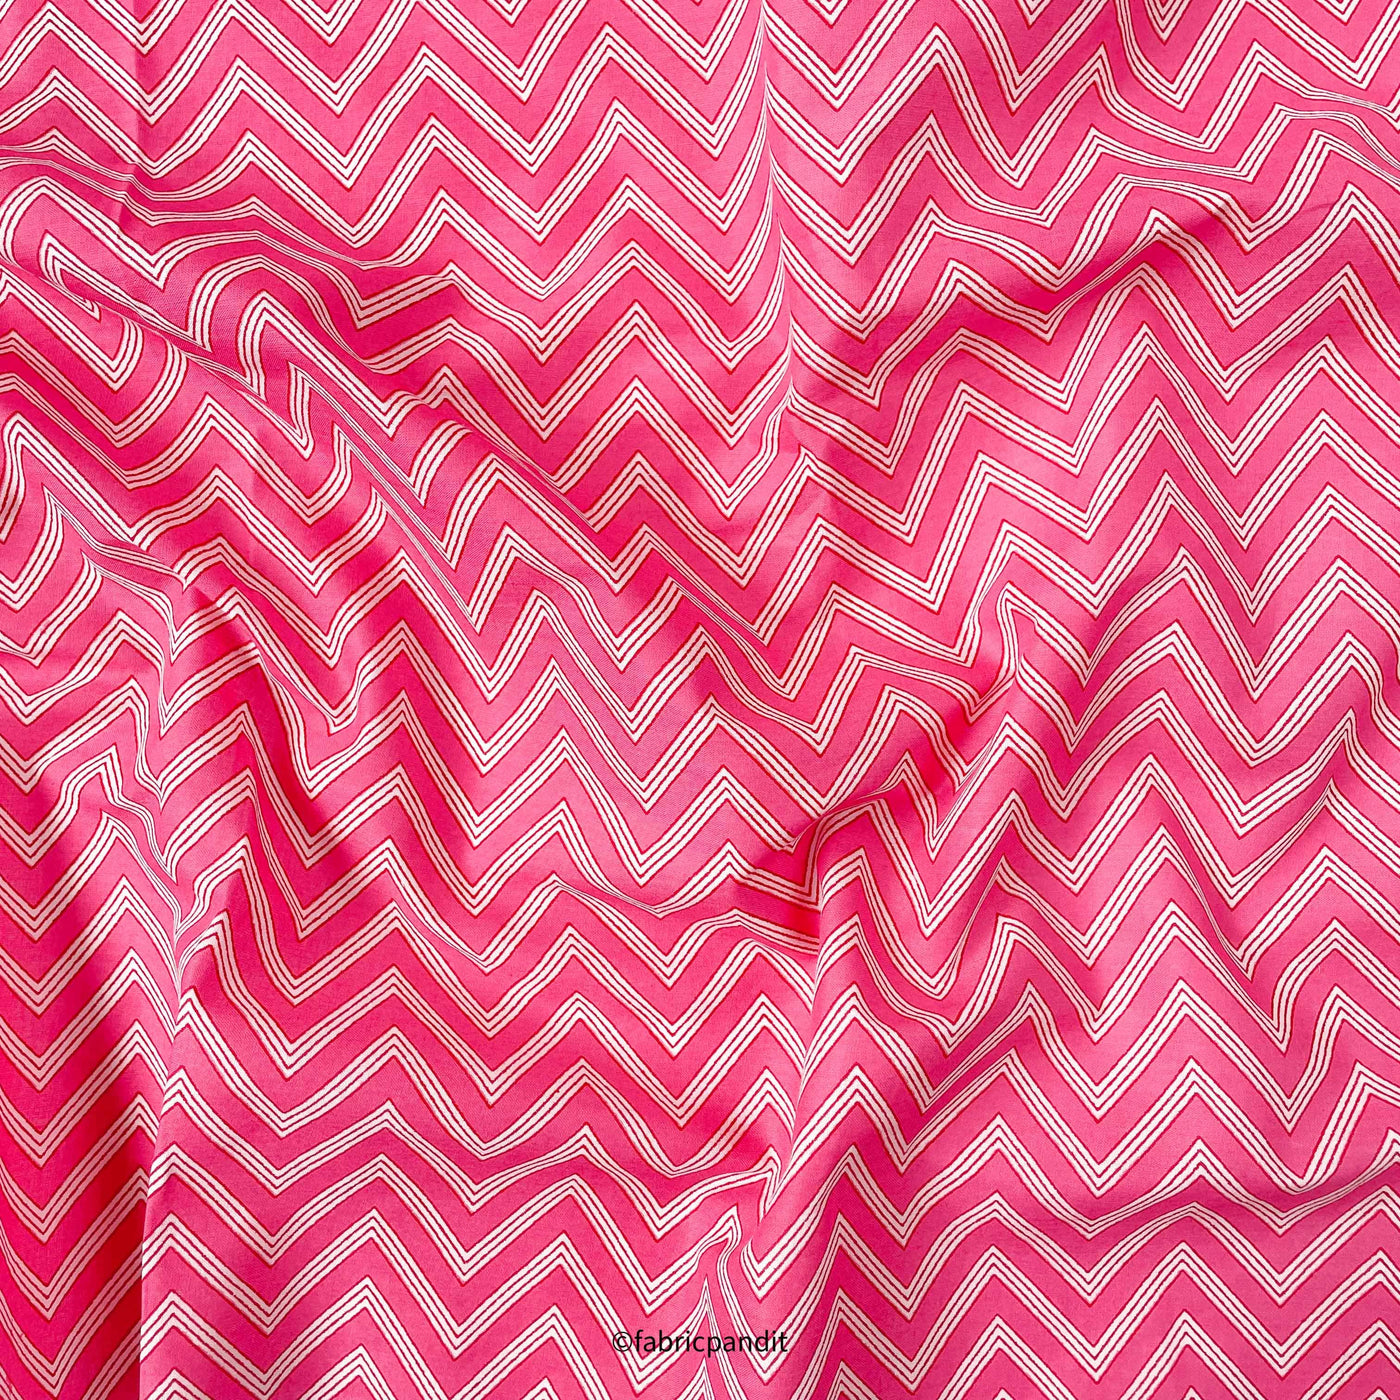 Hand Block Printed Cotton Fabric Cut Piece (CUT PIECE) Pink & White All Over Zig-Zag Hand Block Printed Pure Cotton Fabric (Width 42 inches)